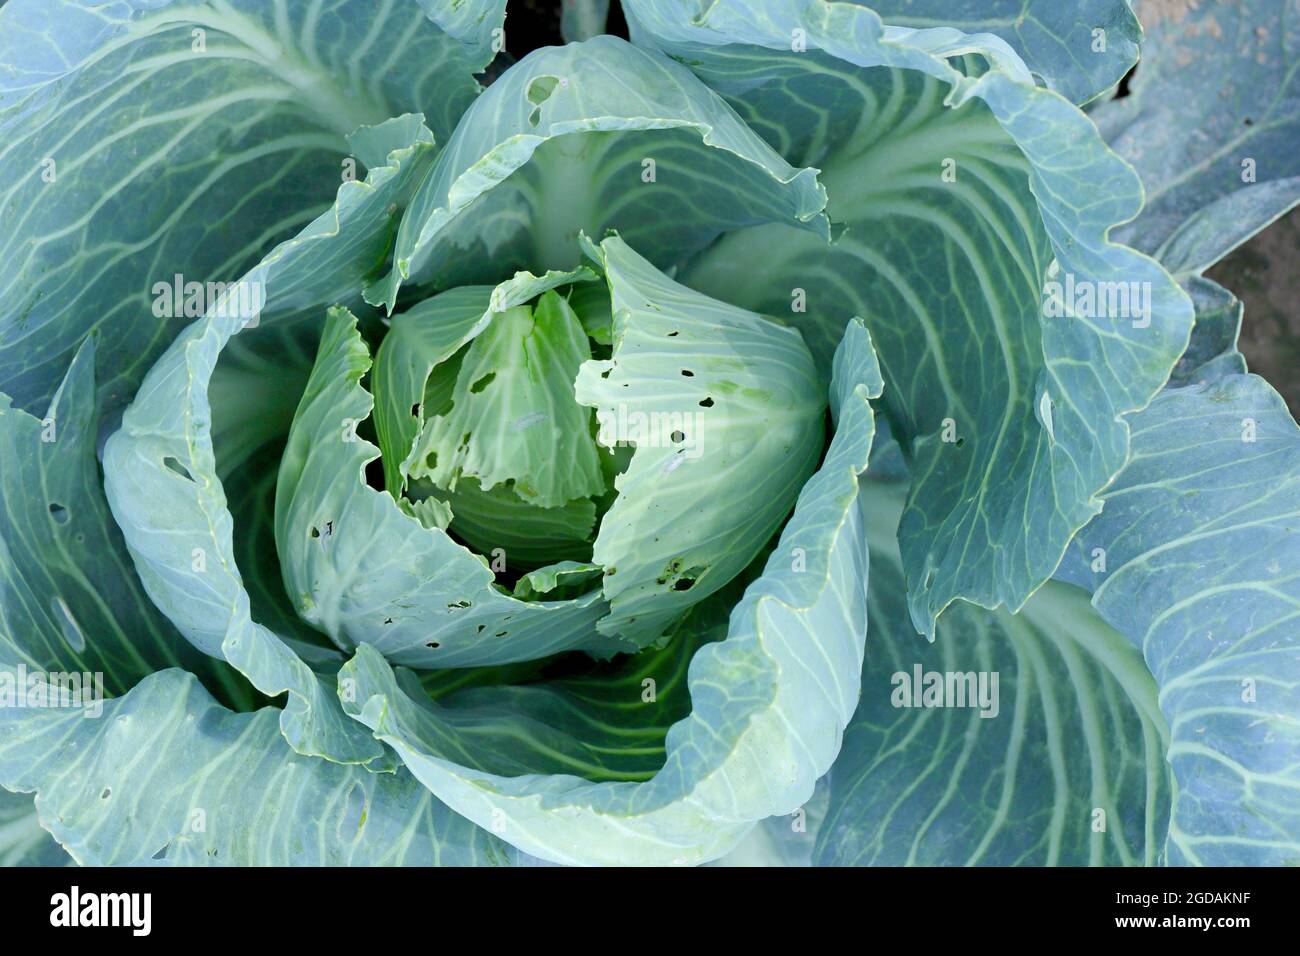 cabbage damaged by caterpillars of diamondback moth (Plutella xylostella), sometimes called the cabbage moth. Two pupae in the cocoon are visible. Stock Photo